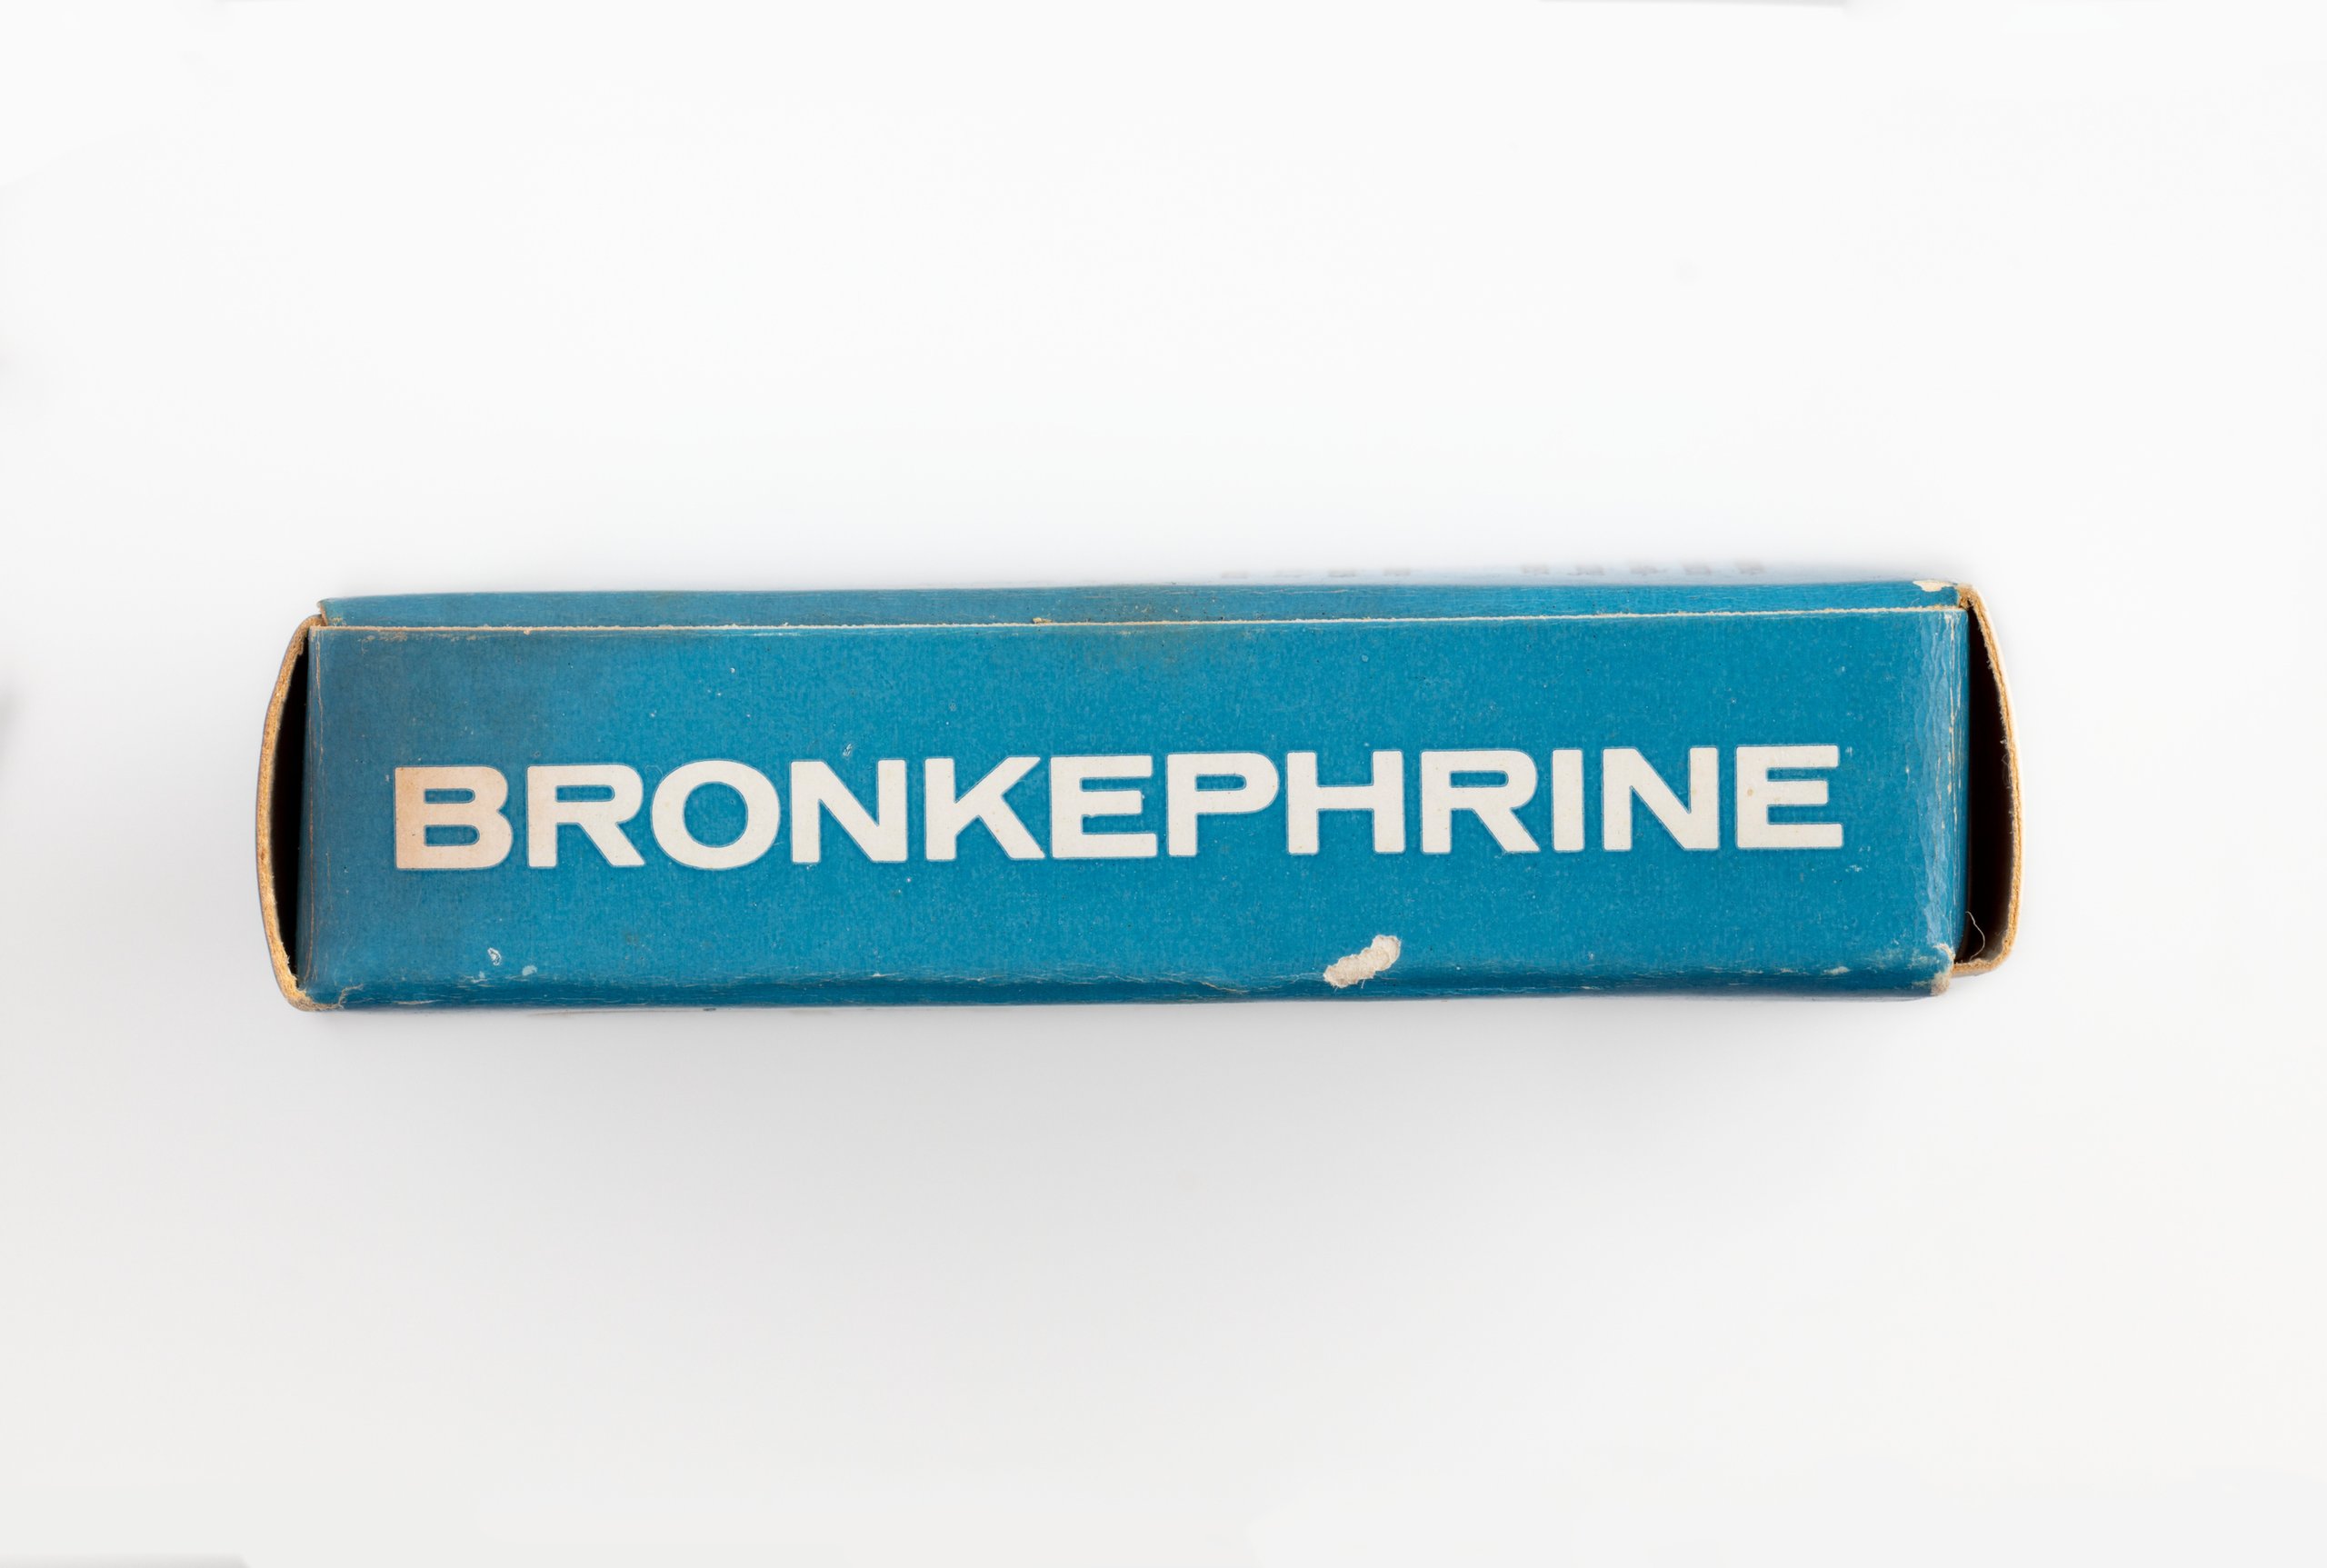 Vials of Bronkephrine made by Winthrop Laboratories